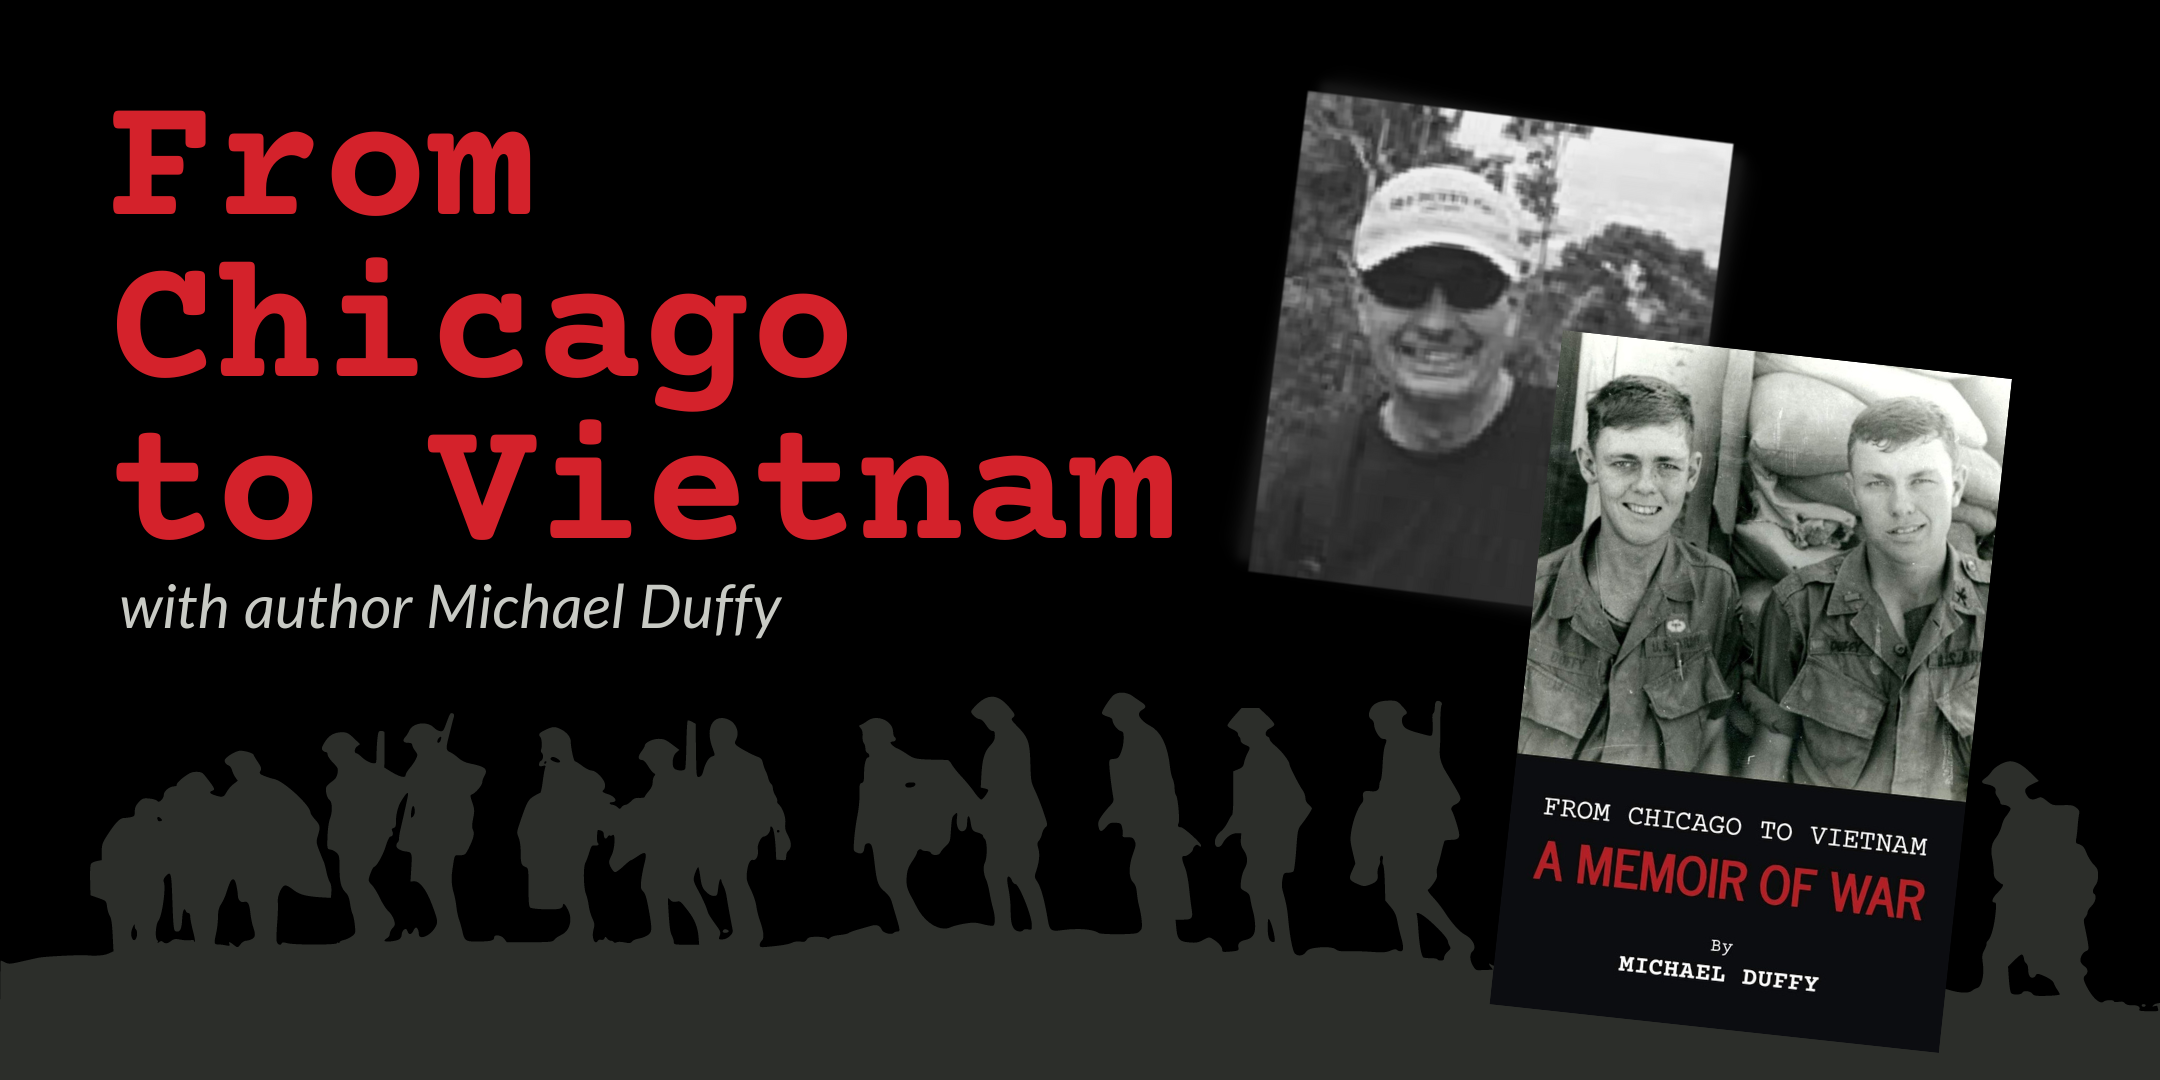 image of "From Chicago to Vietnam"